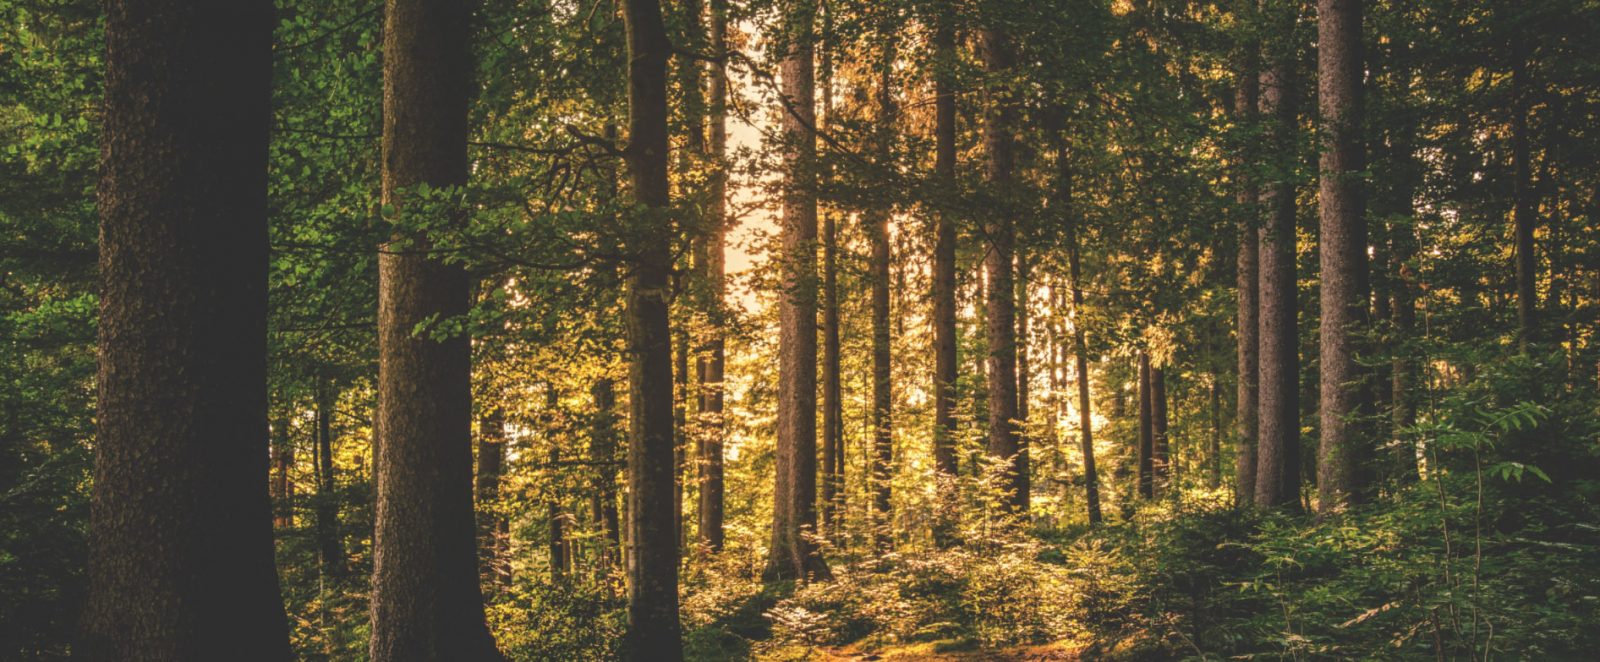 Resources and benefits that forests provide to humankind